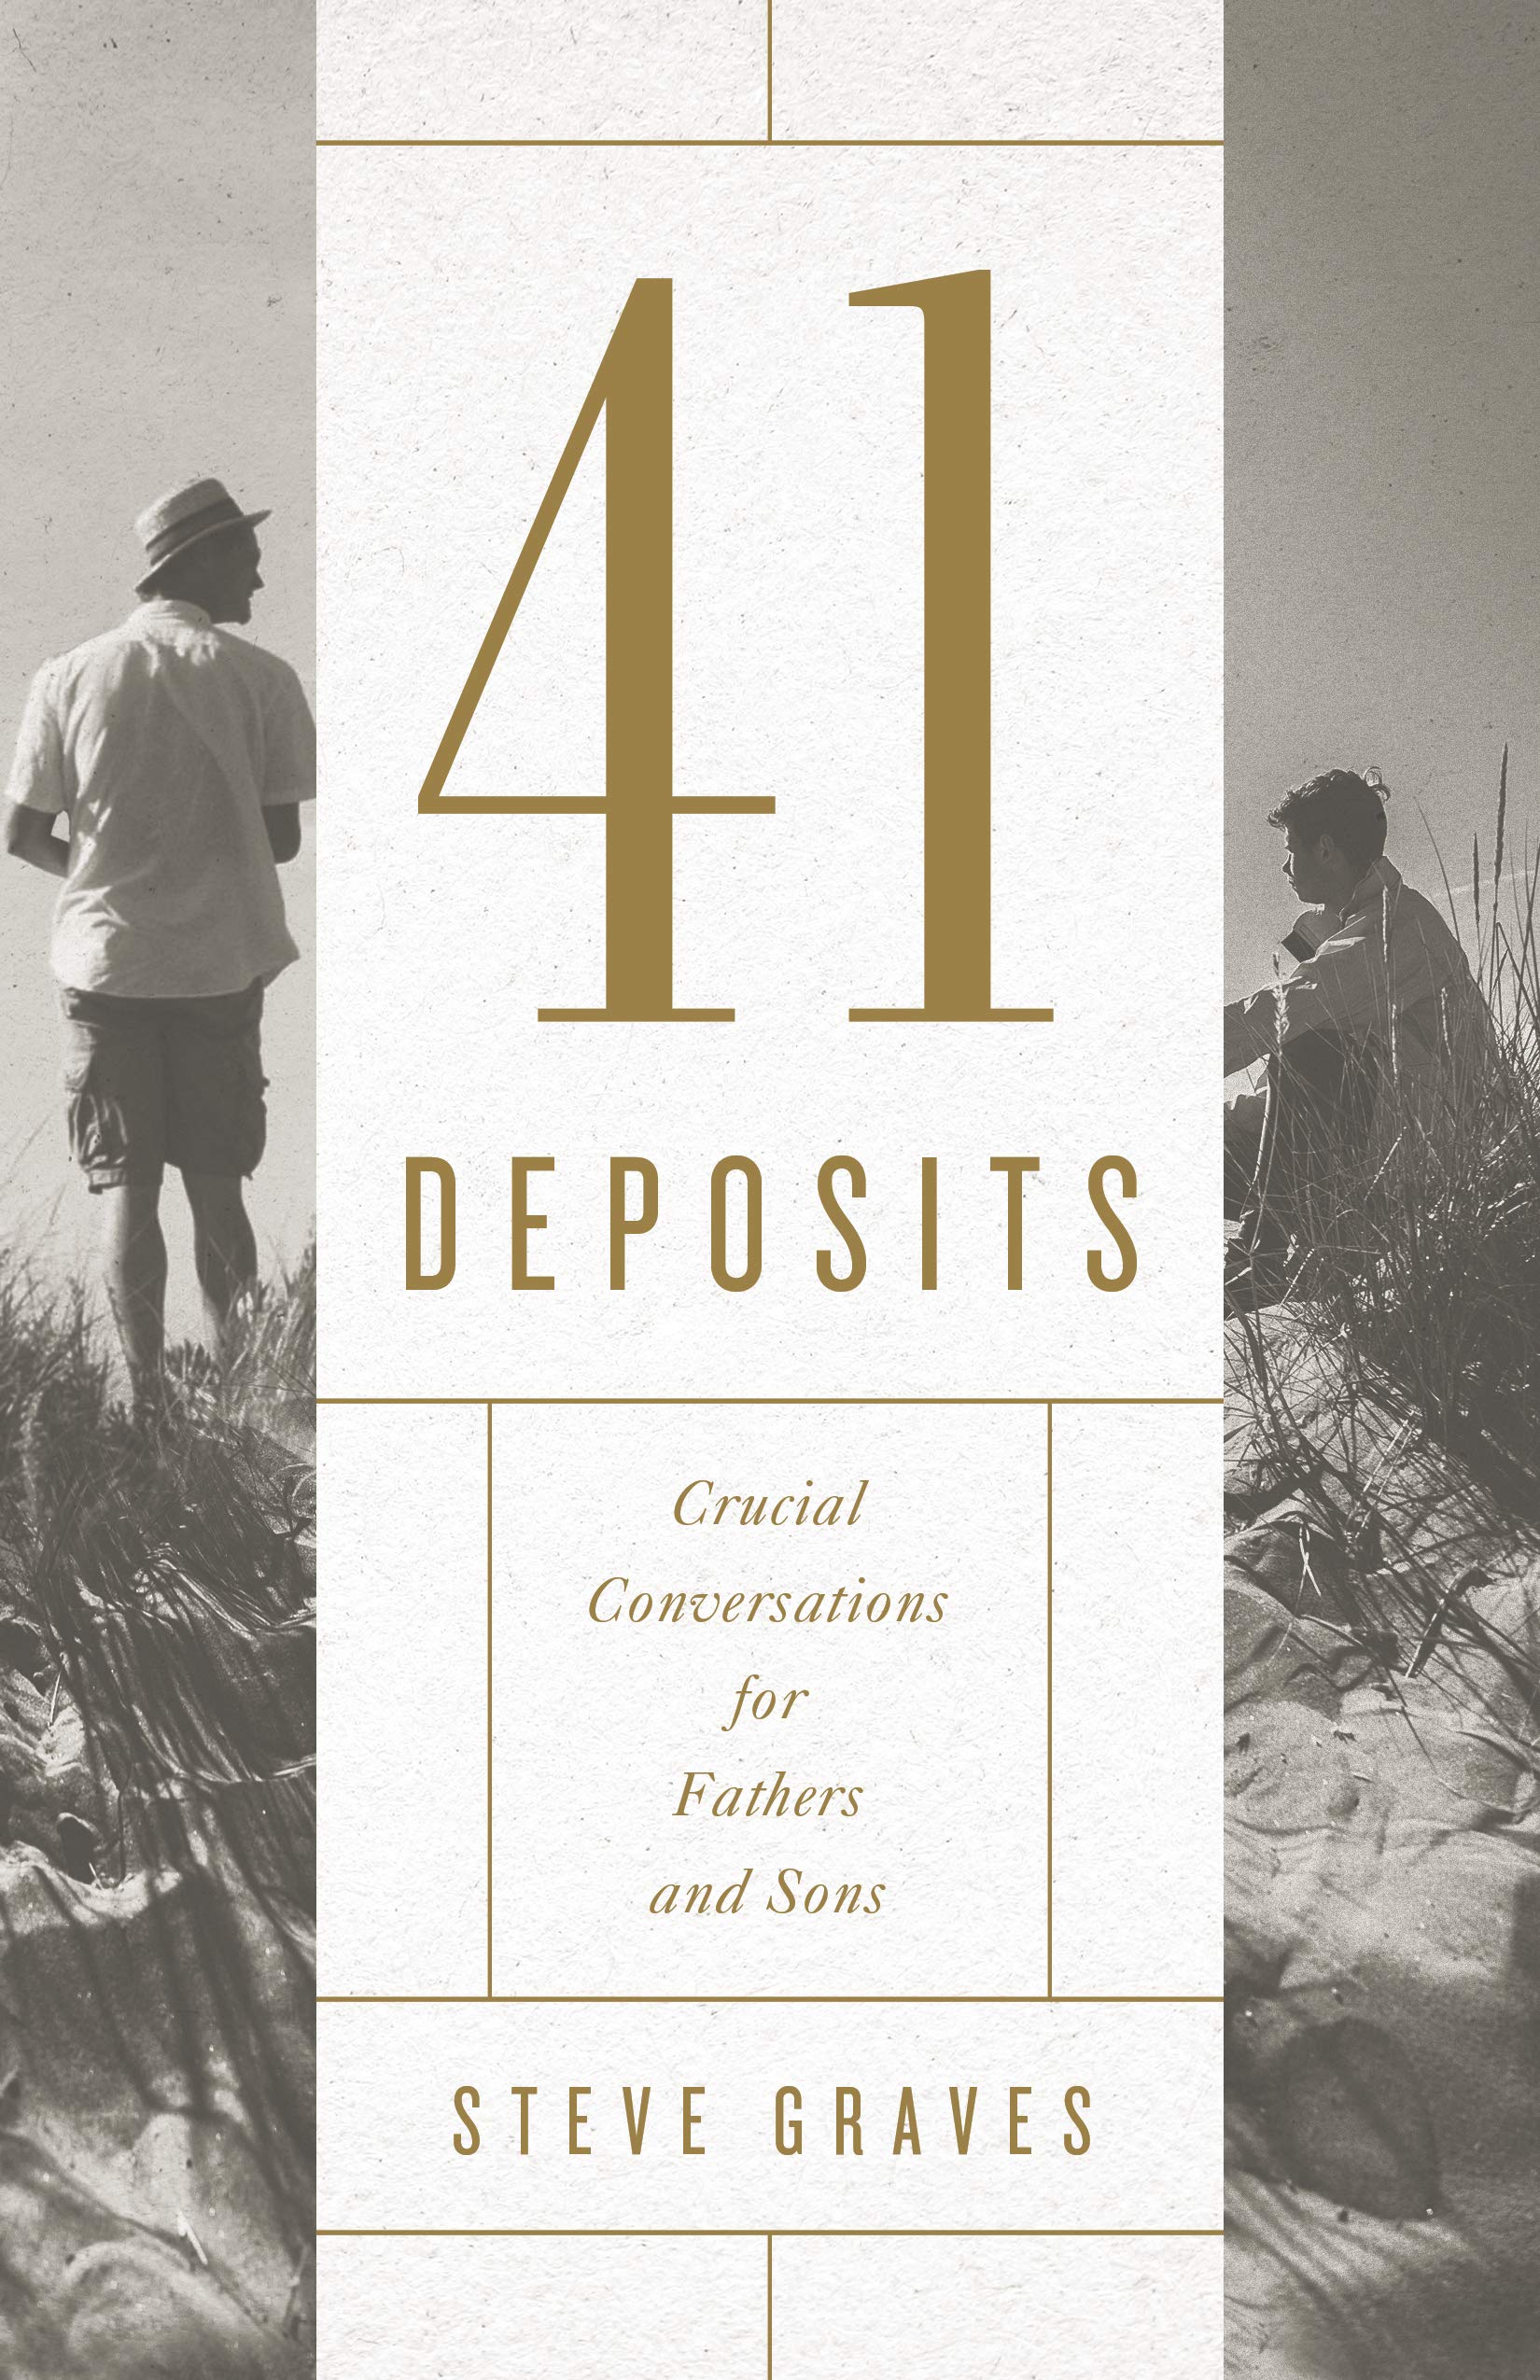 for　and　41　Bookstore　Deposits:　Crucial　–　Golden　Conversations　Fathers　Sons　Paperback　Springs　Christian